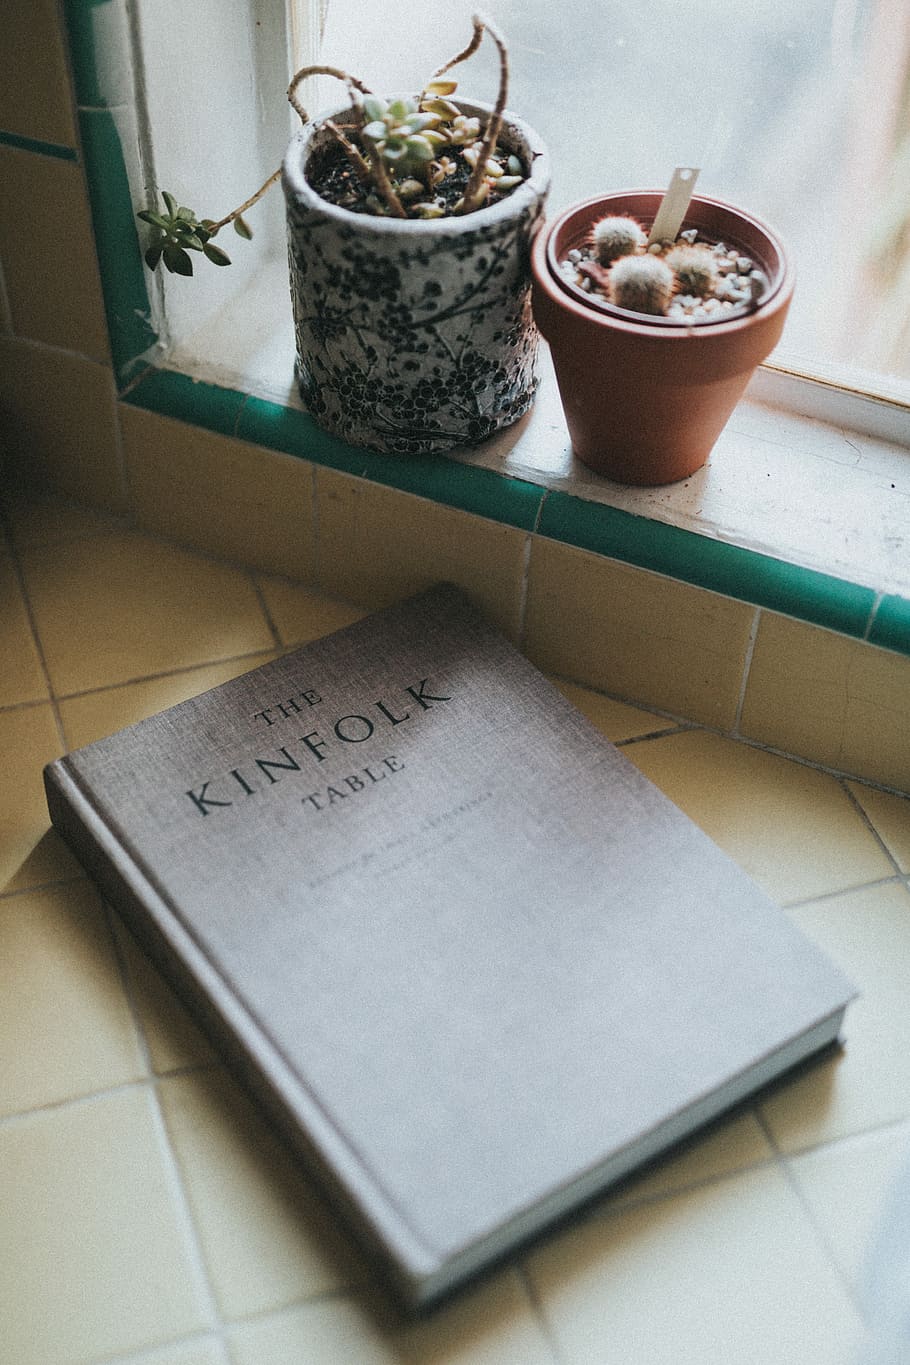 The Kinfolk Table near cactus plant, The Kinfolk Table book beside plant pots on brown surface, HD wallpaper